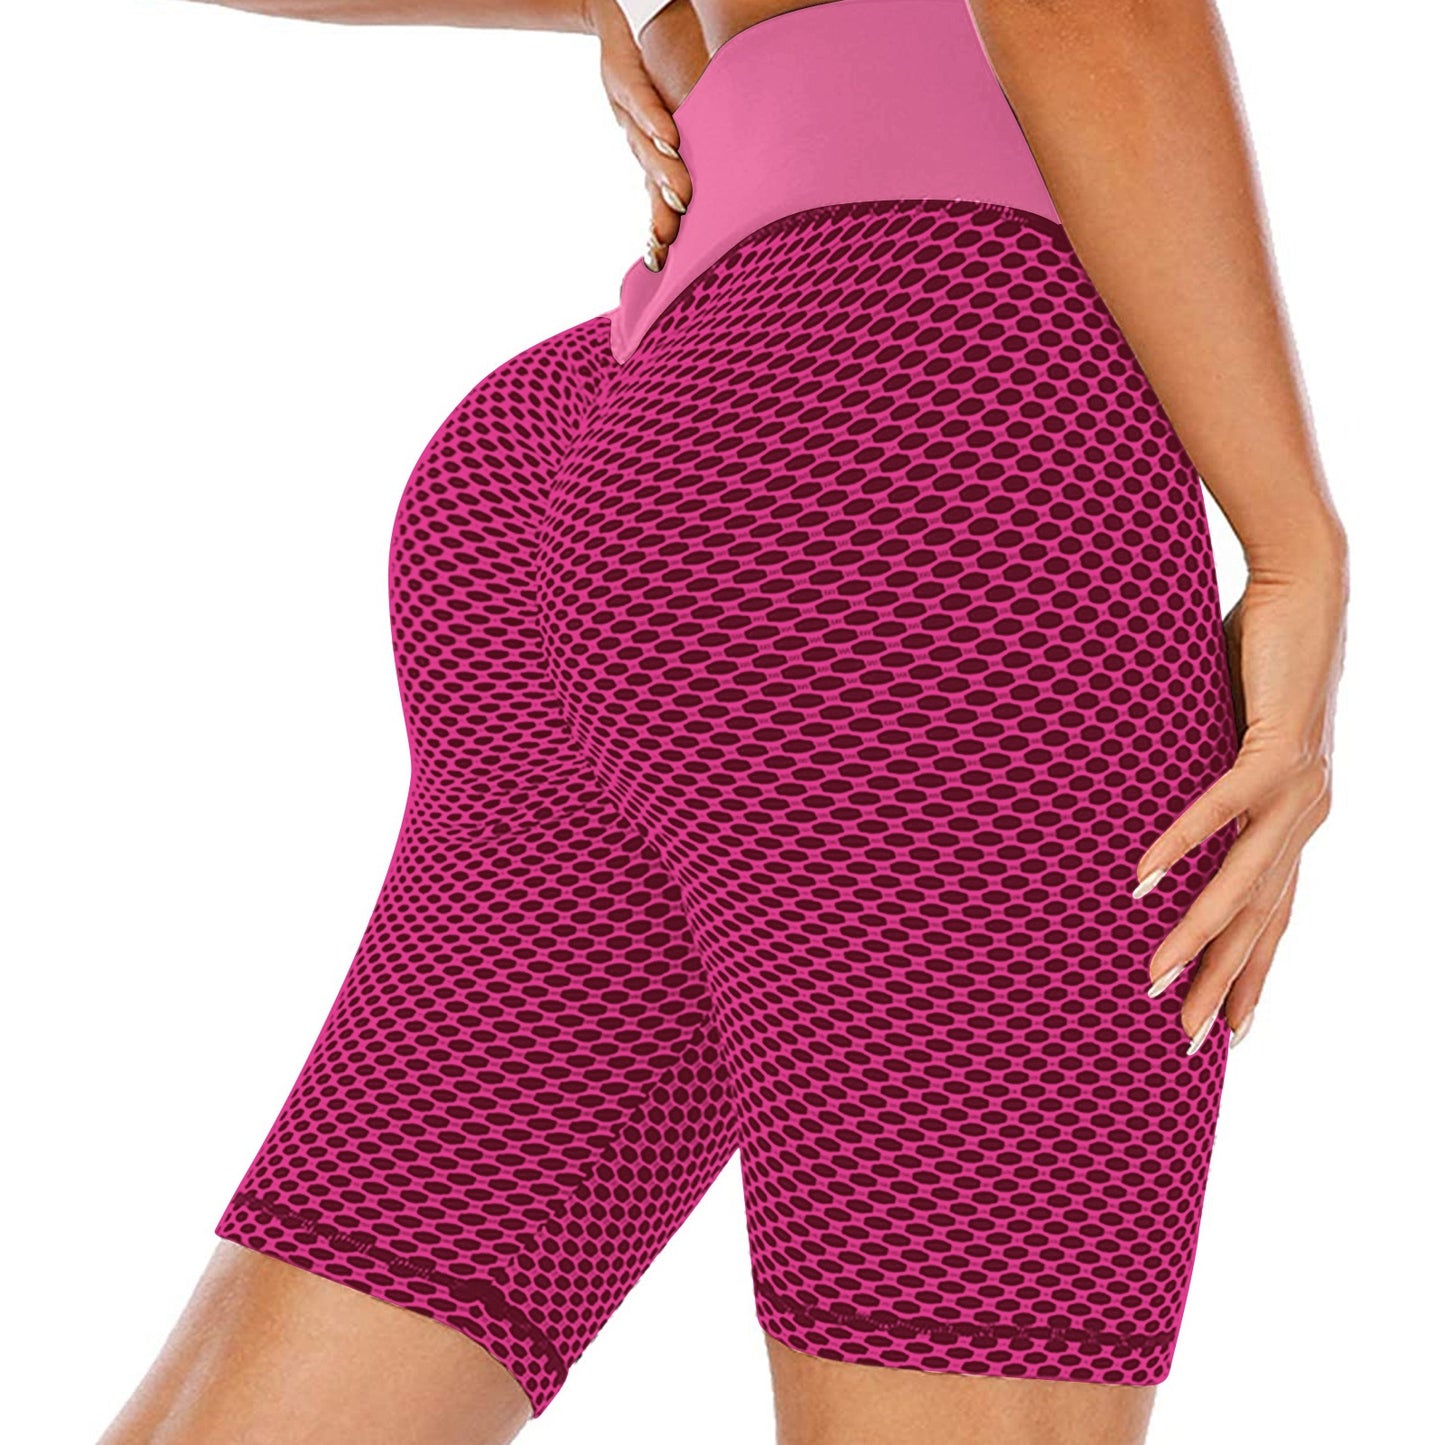 New sports yoga five-point shorts net red high waist stretch fitness tights